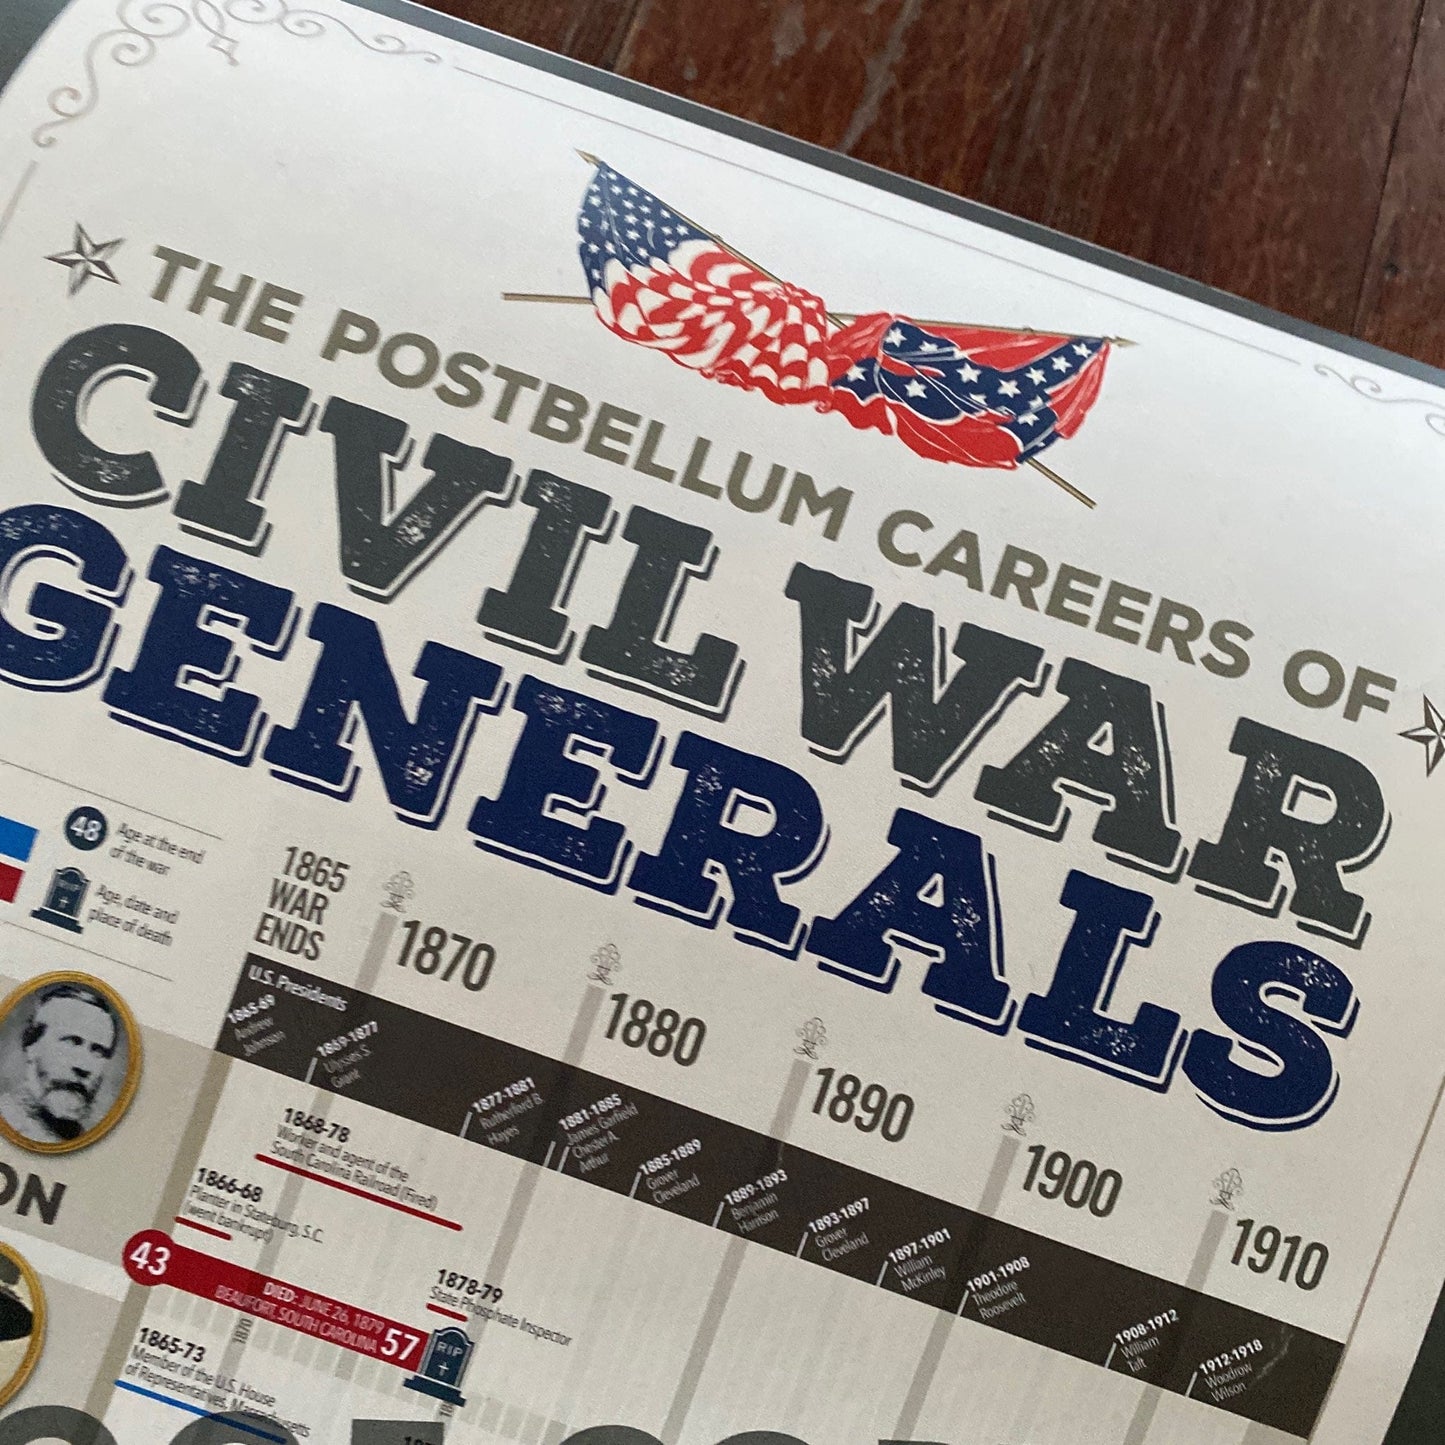 "The Postbellum Careers of Civil War Generals" 88" High Poster Exclusive from the History List Store